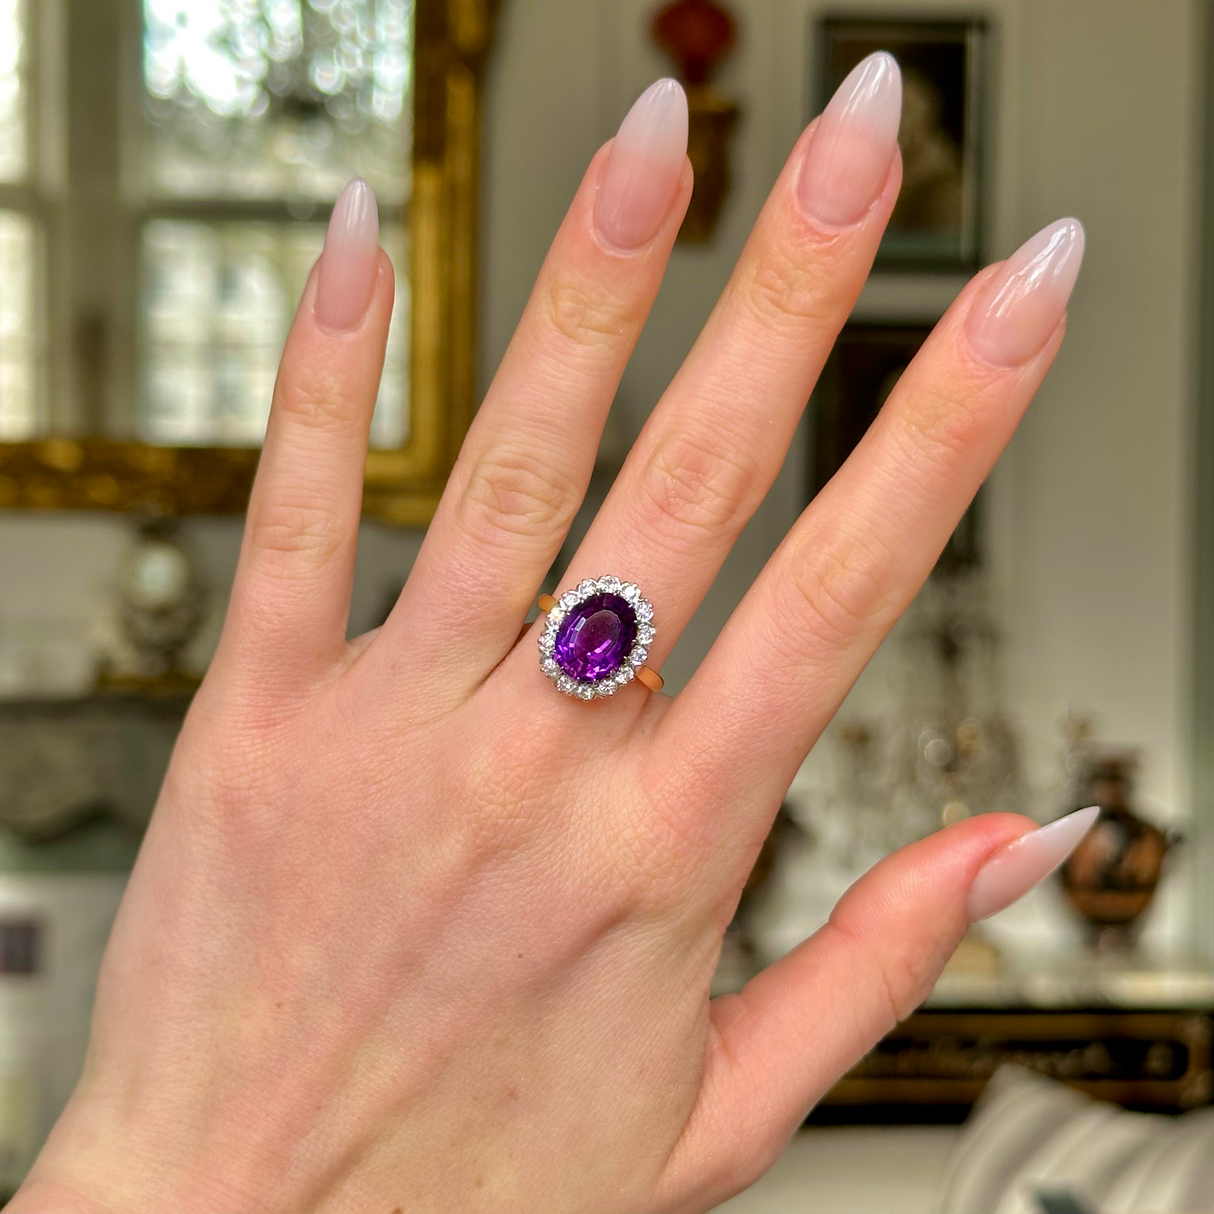 Vintage amethyst and diamond cluster ring, worn on hand. 